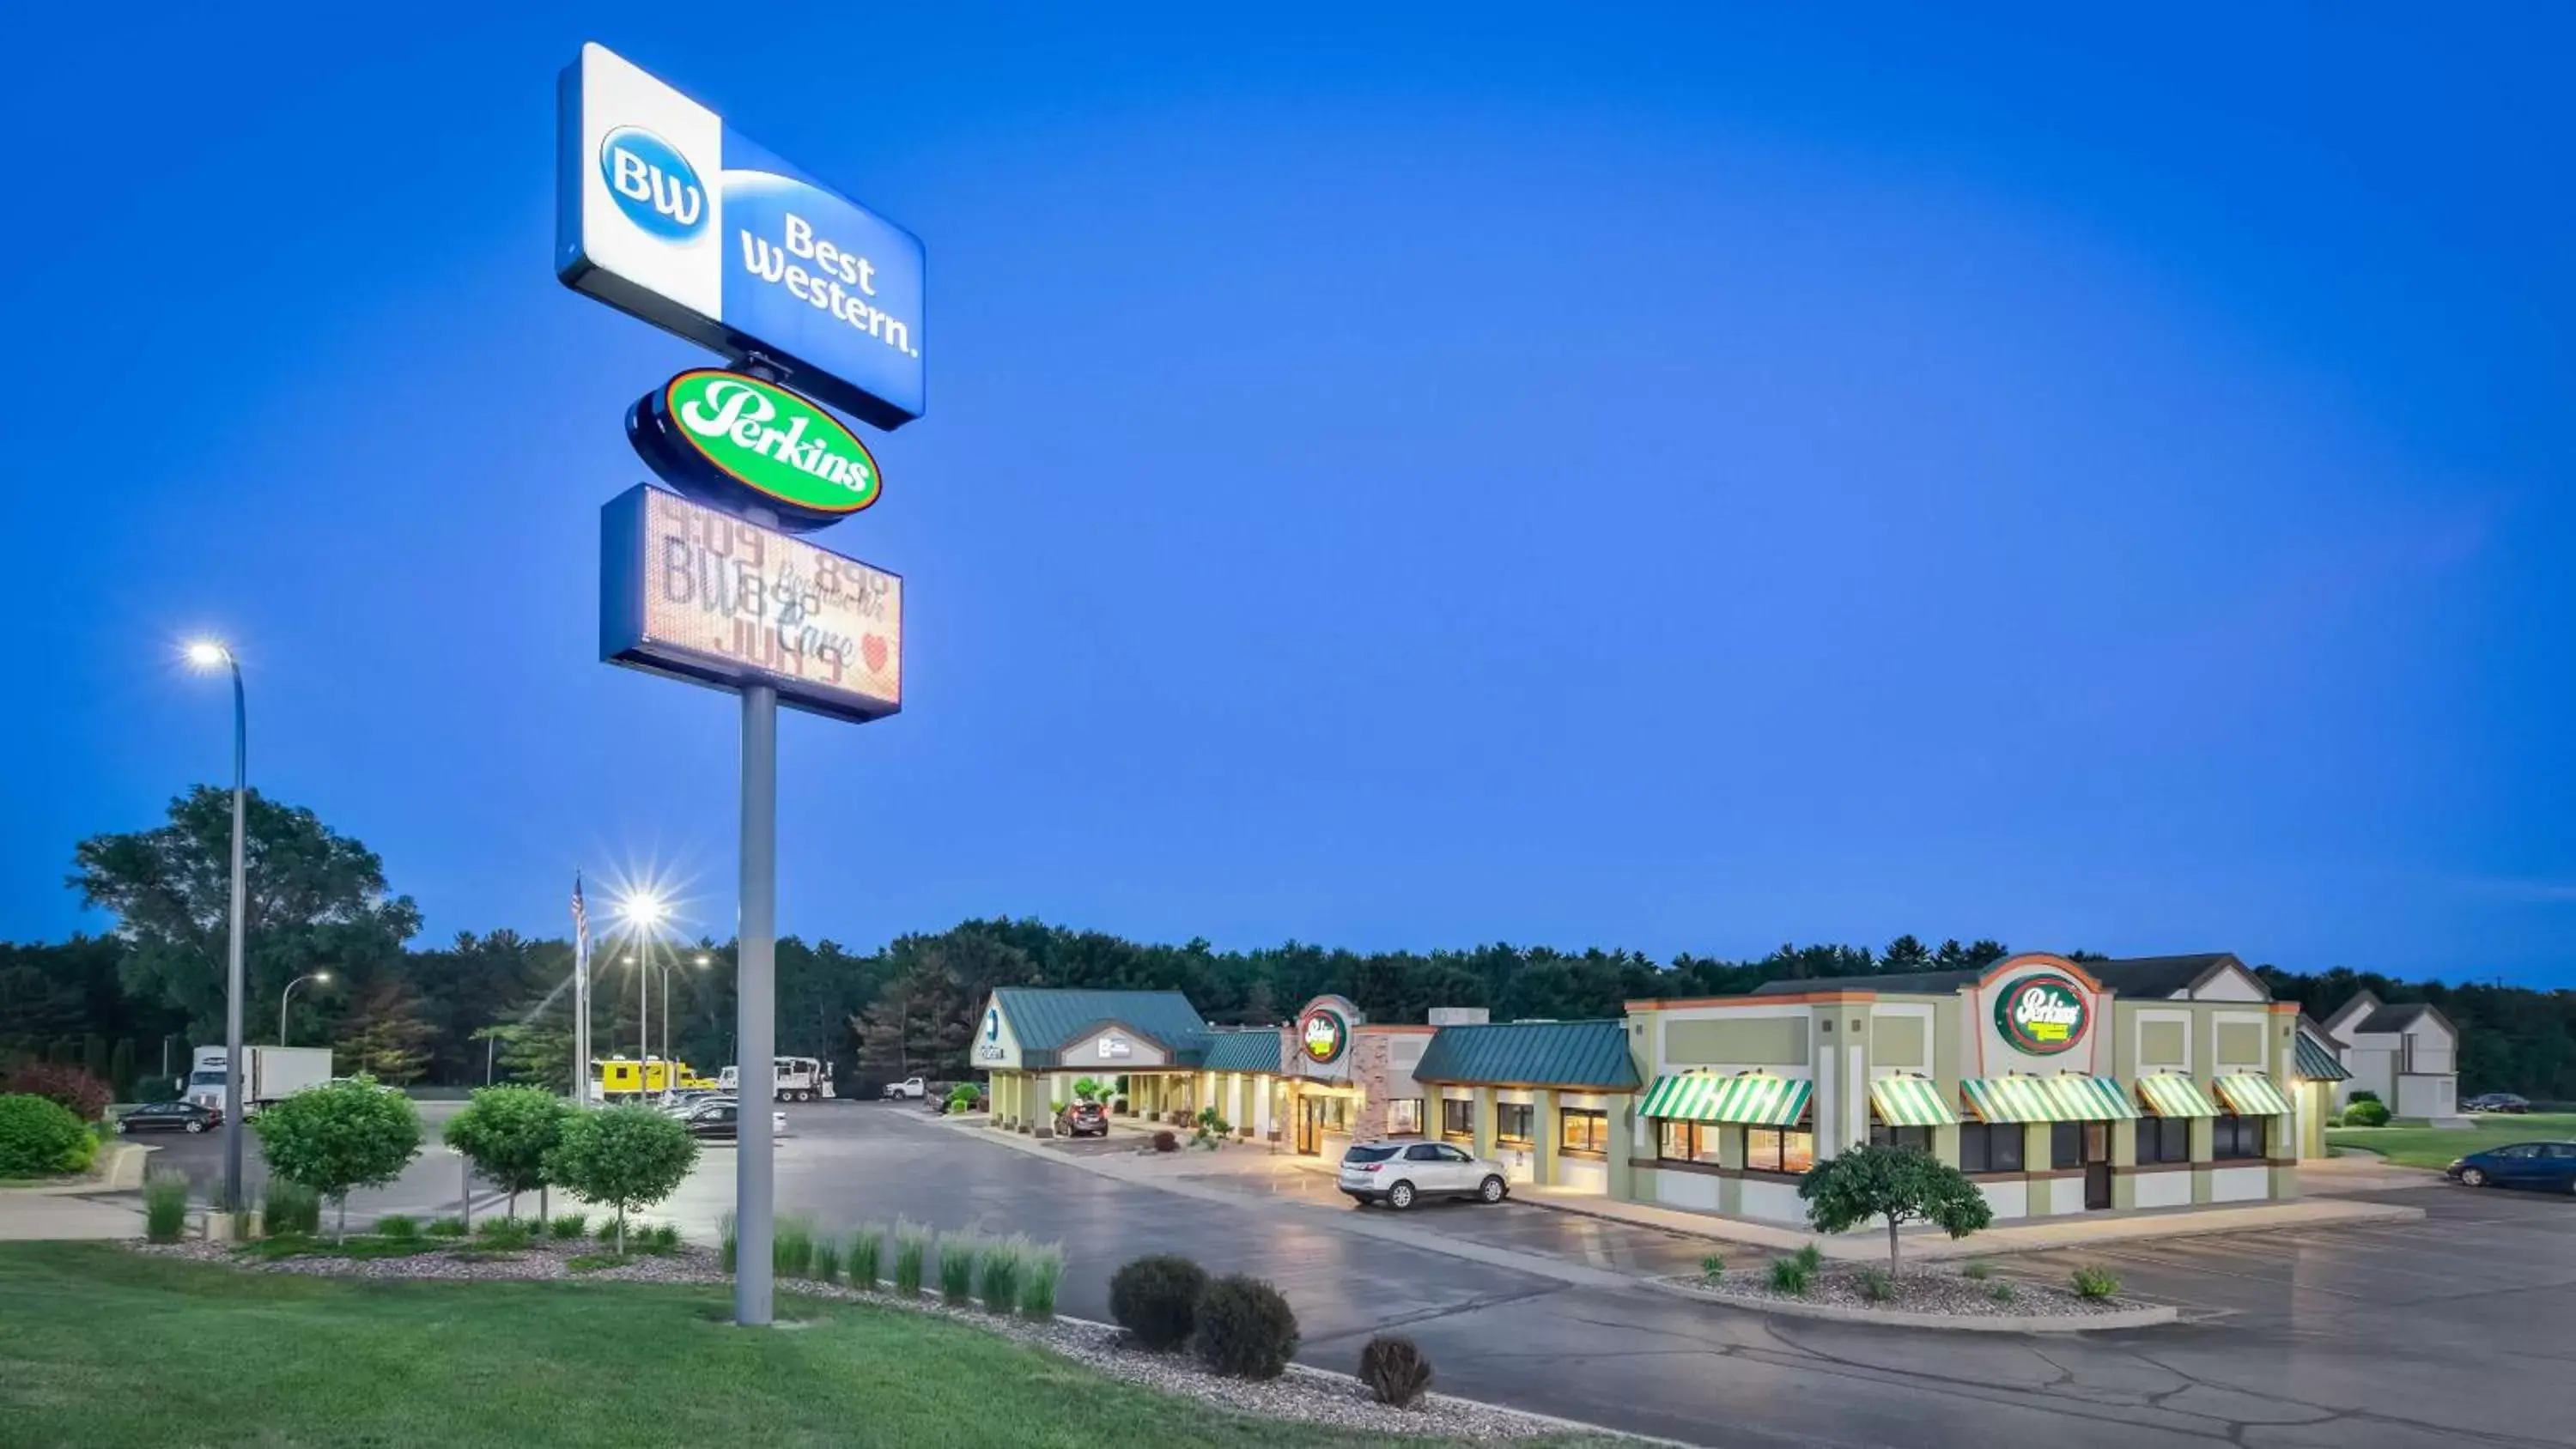 Property building in Best Western Tomah Hotel